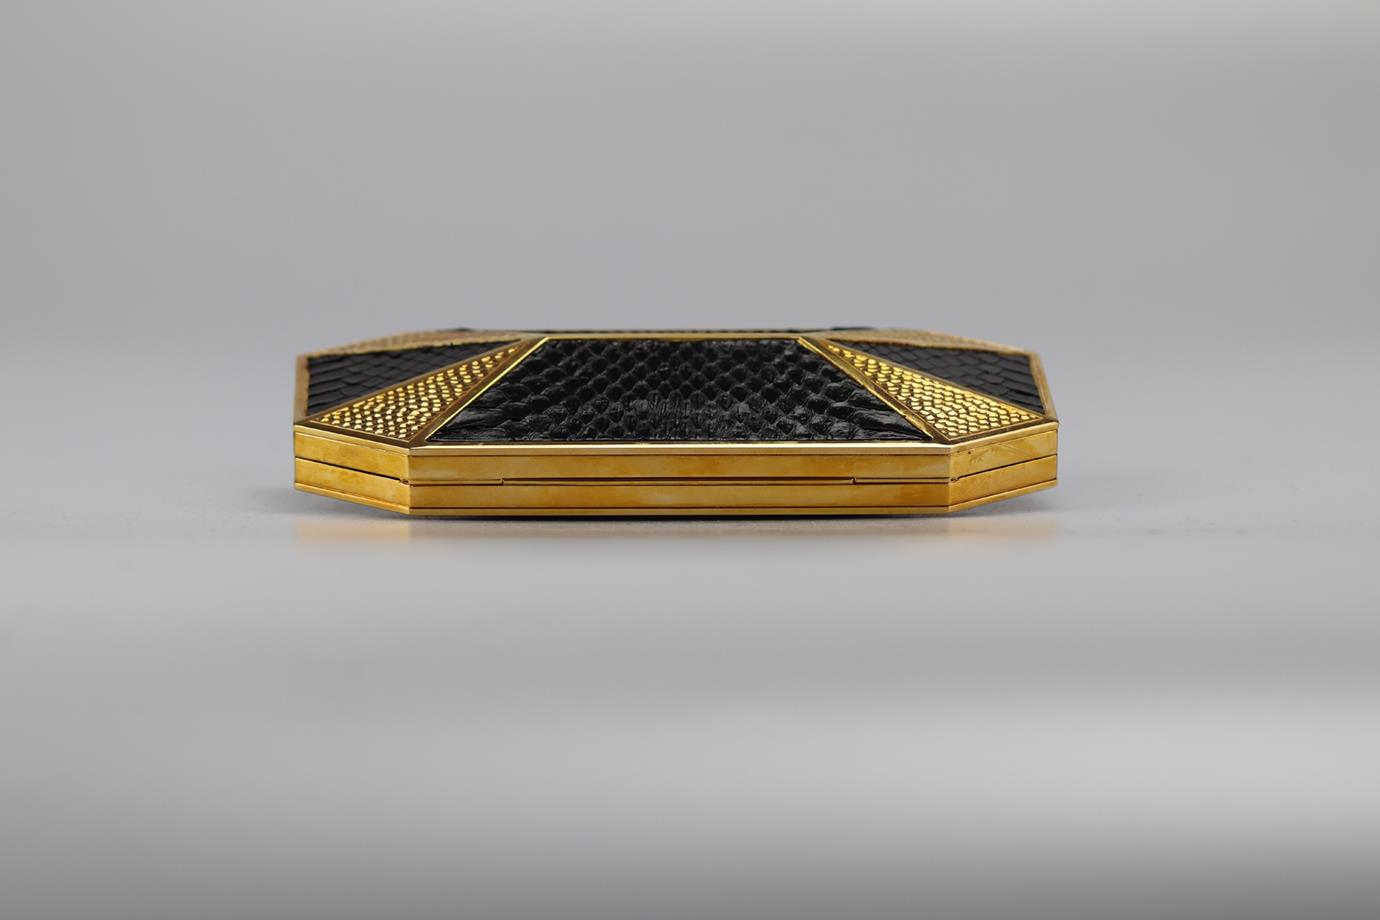 STARK PYTHON AND GOLD TONE CLUTCH